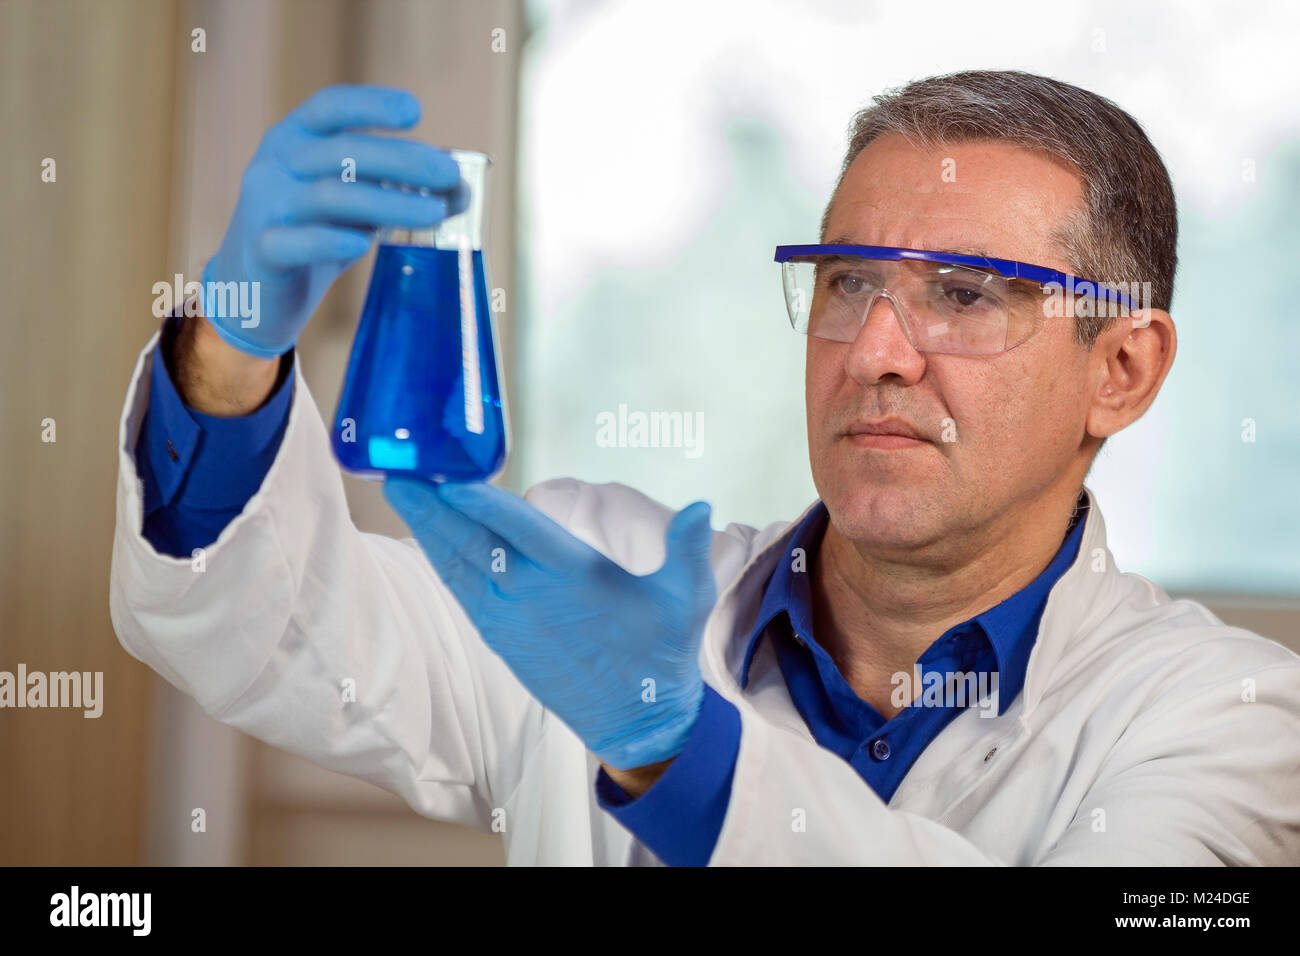 Scientist wearing protective gear, working in laboratory. Stock Photo